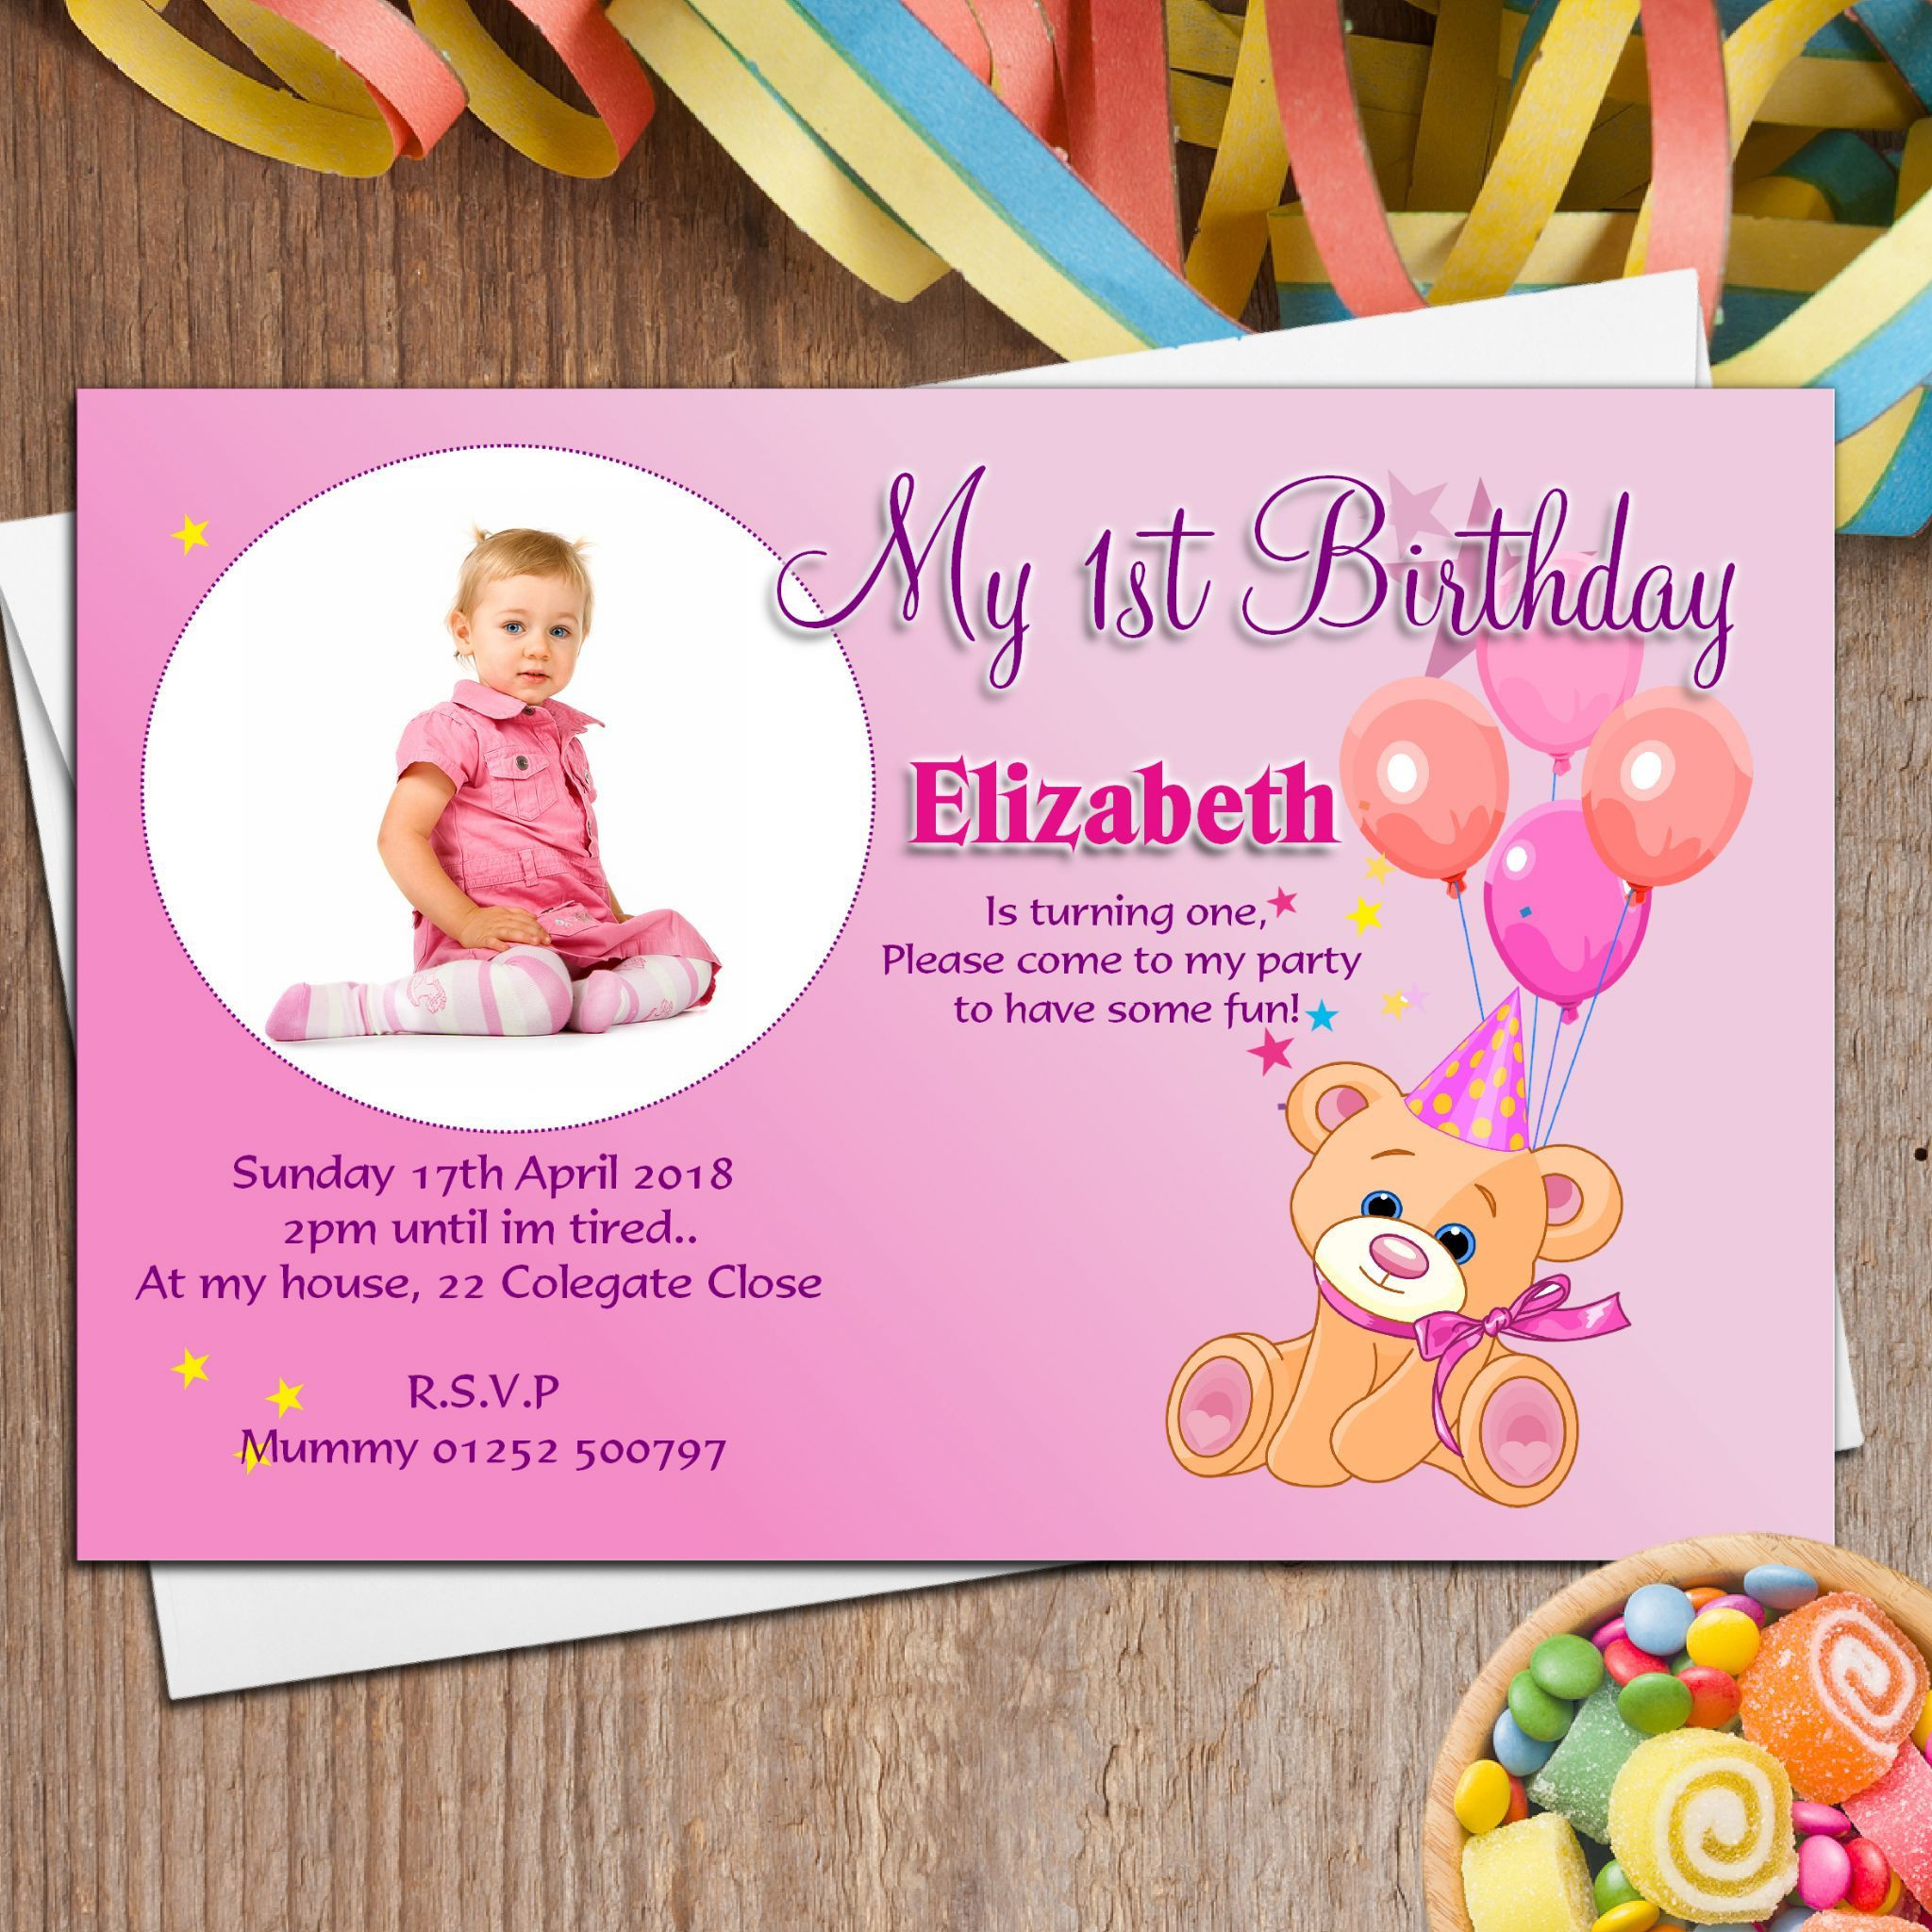 Invitation Cards For Birthday
 1st Birthday Invitation Cards For Baby Boy In India